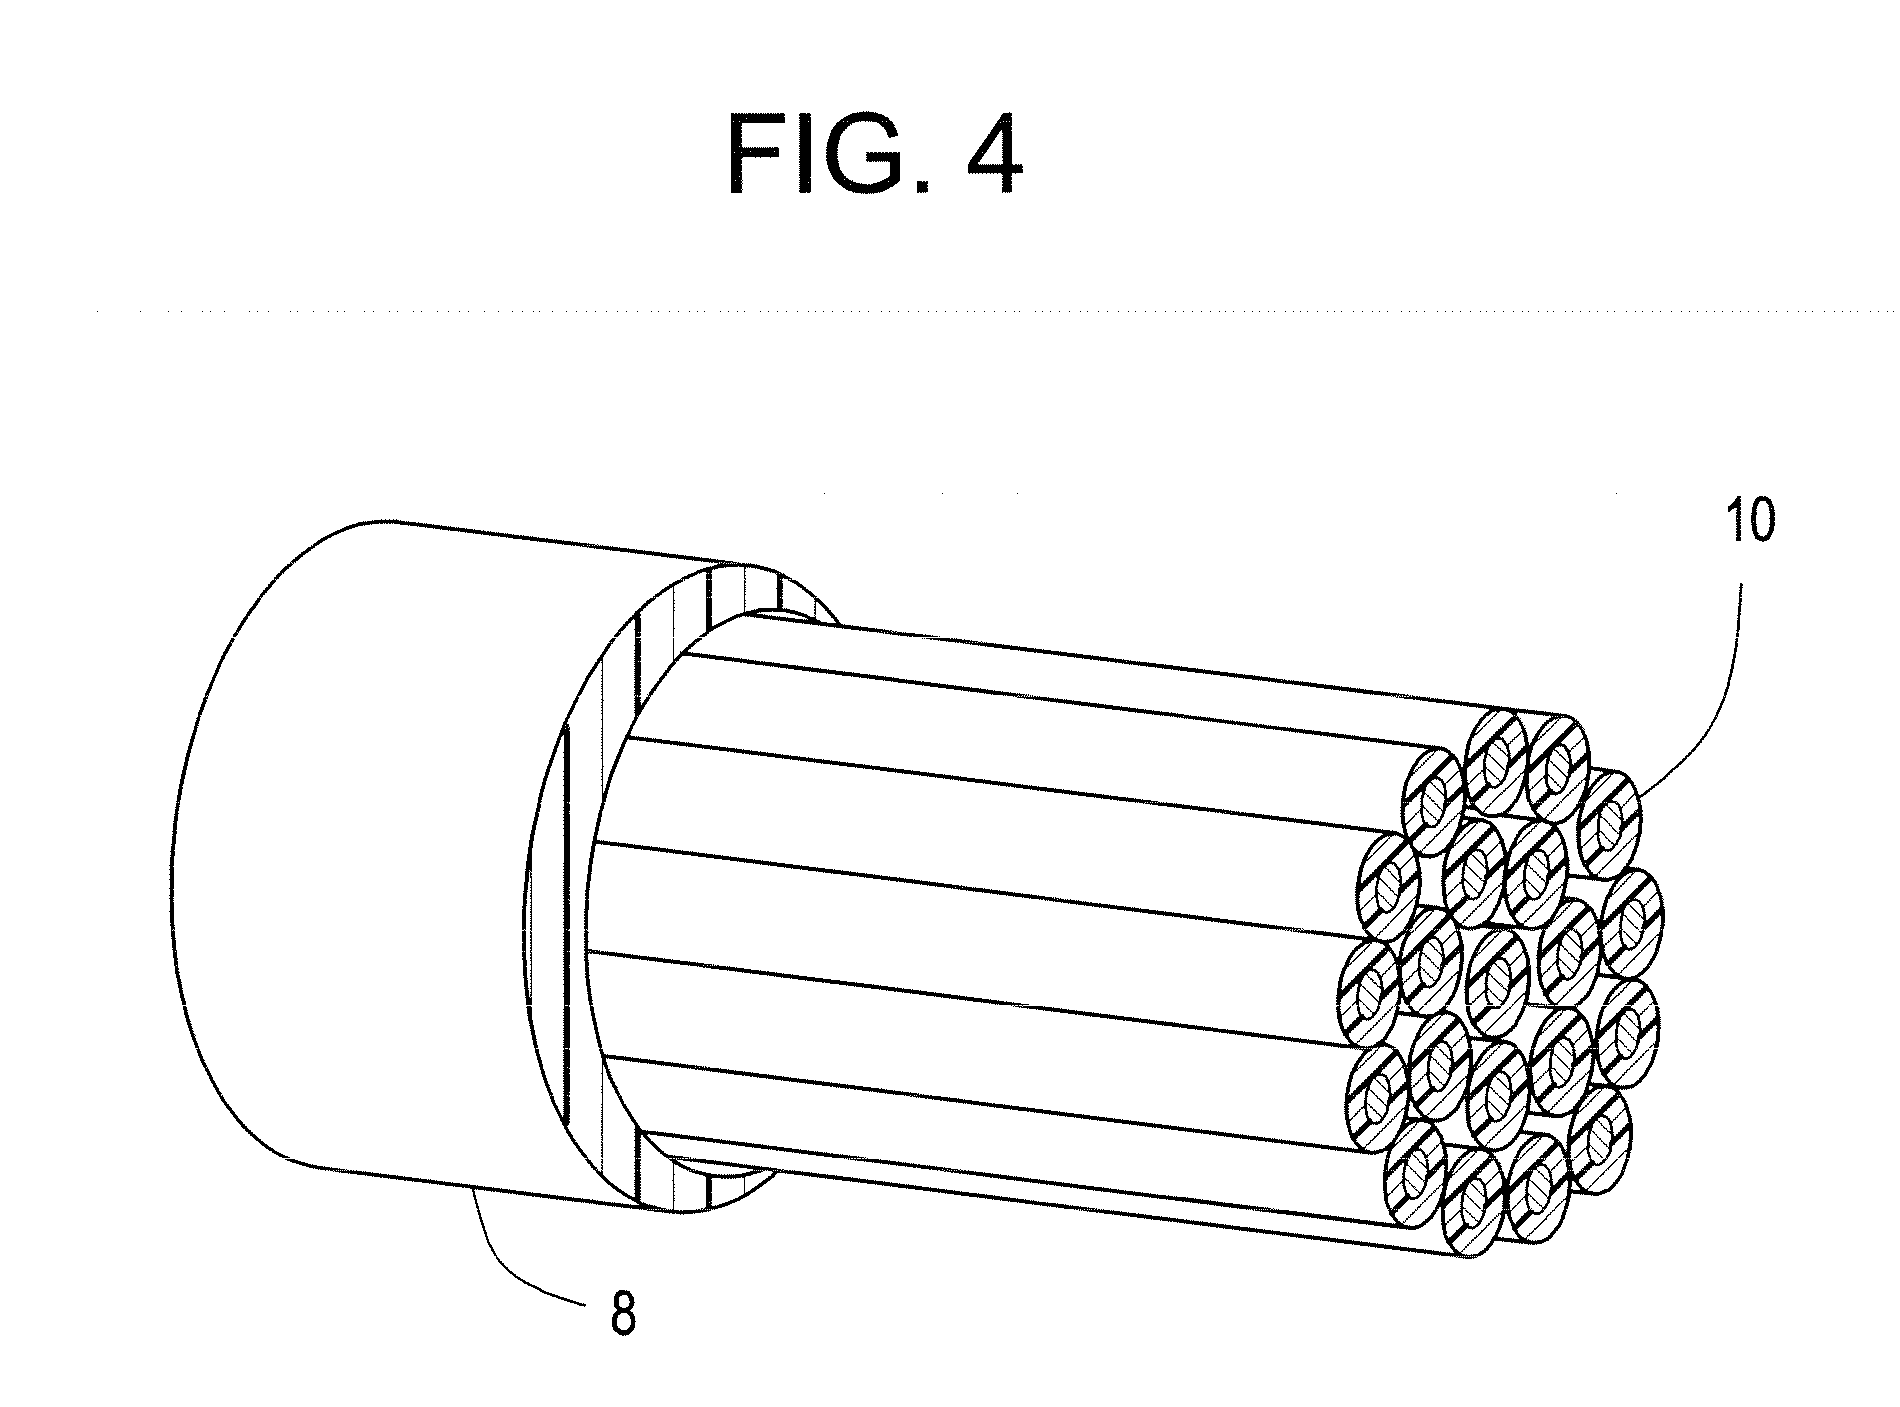 Flame retardant thermoplastic composition and articles comprising the same